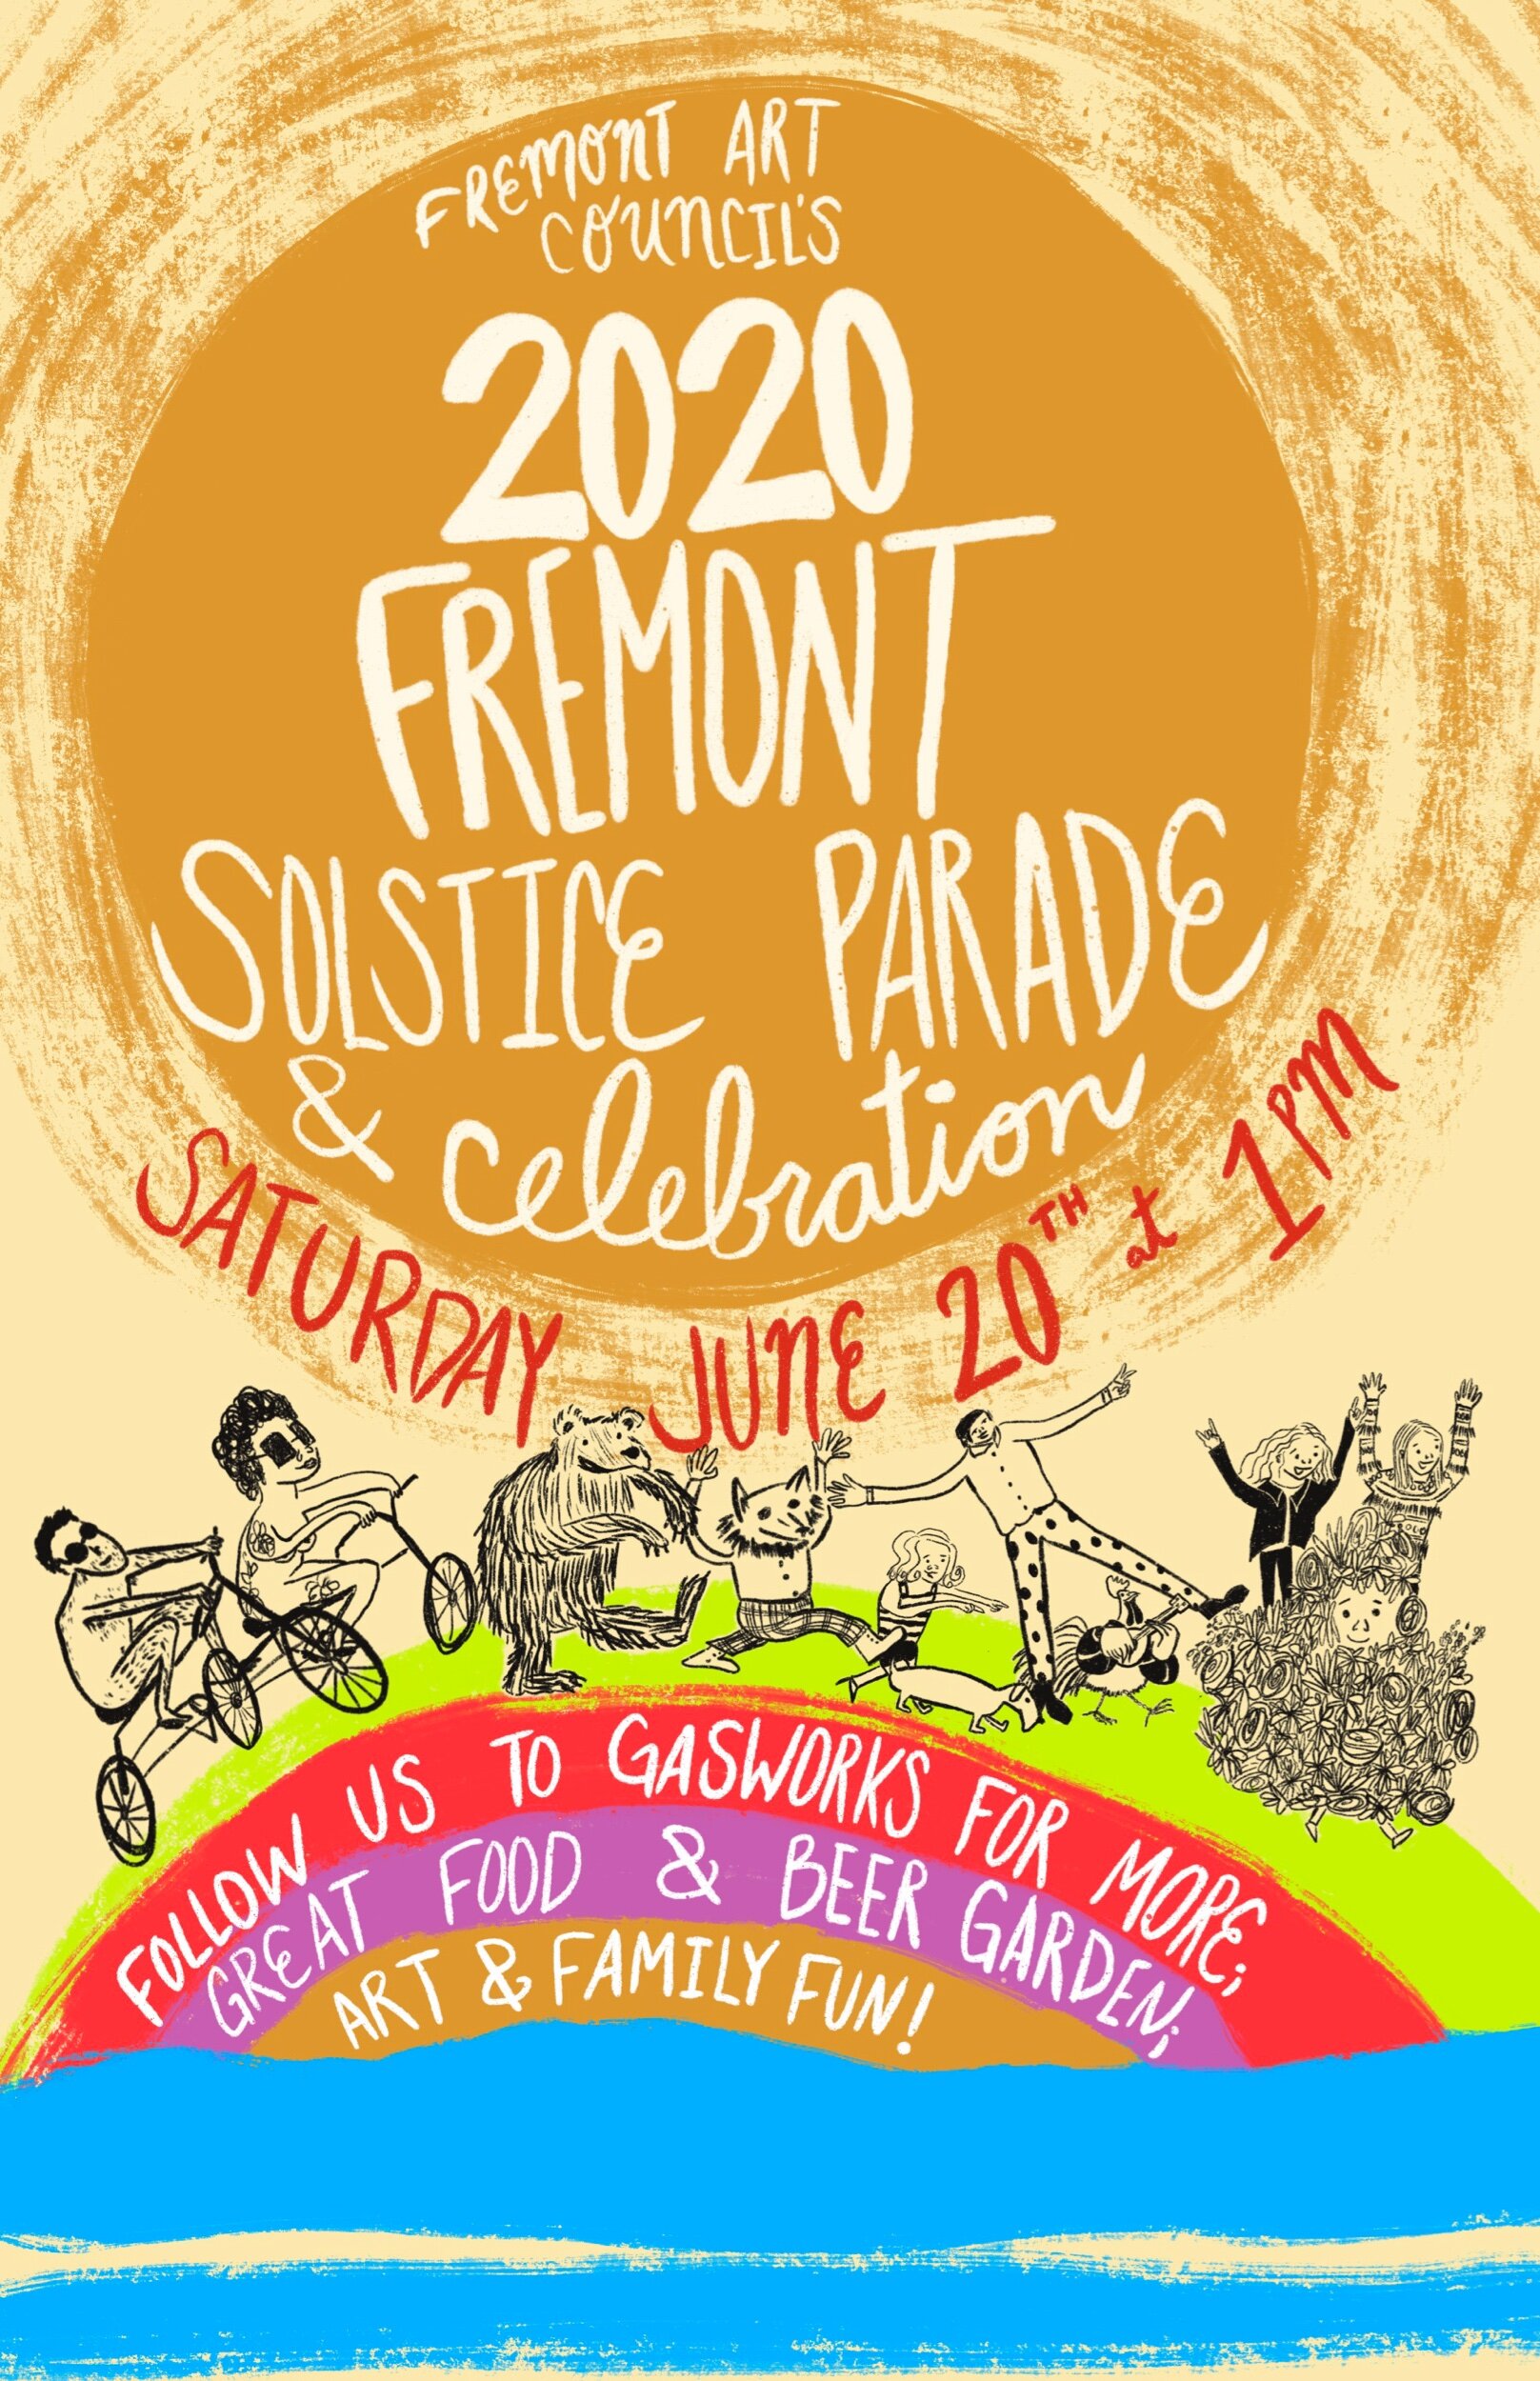 Fremont Solstice Parade poster submission, 2020